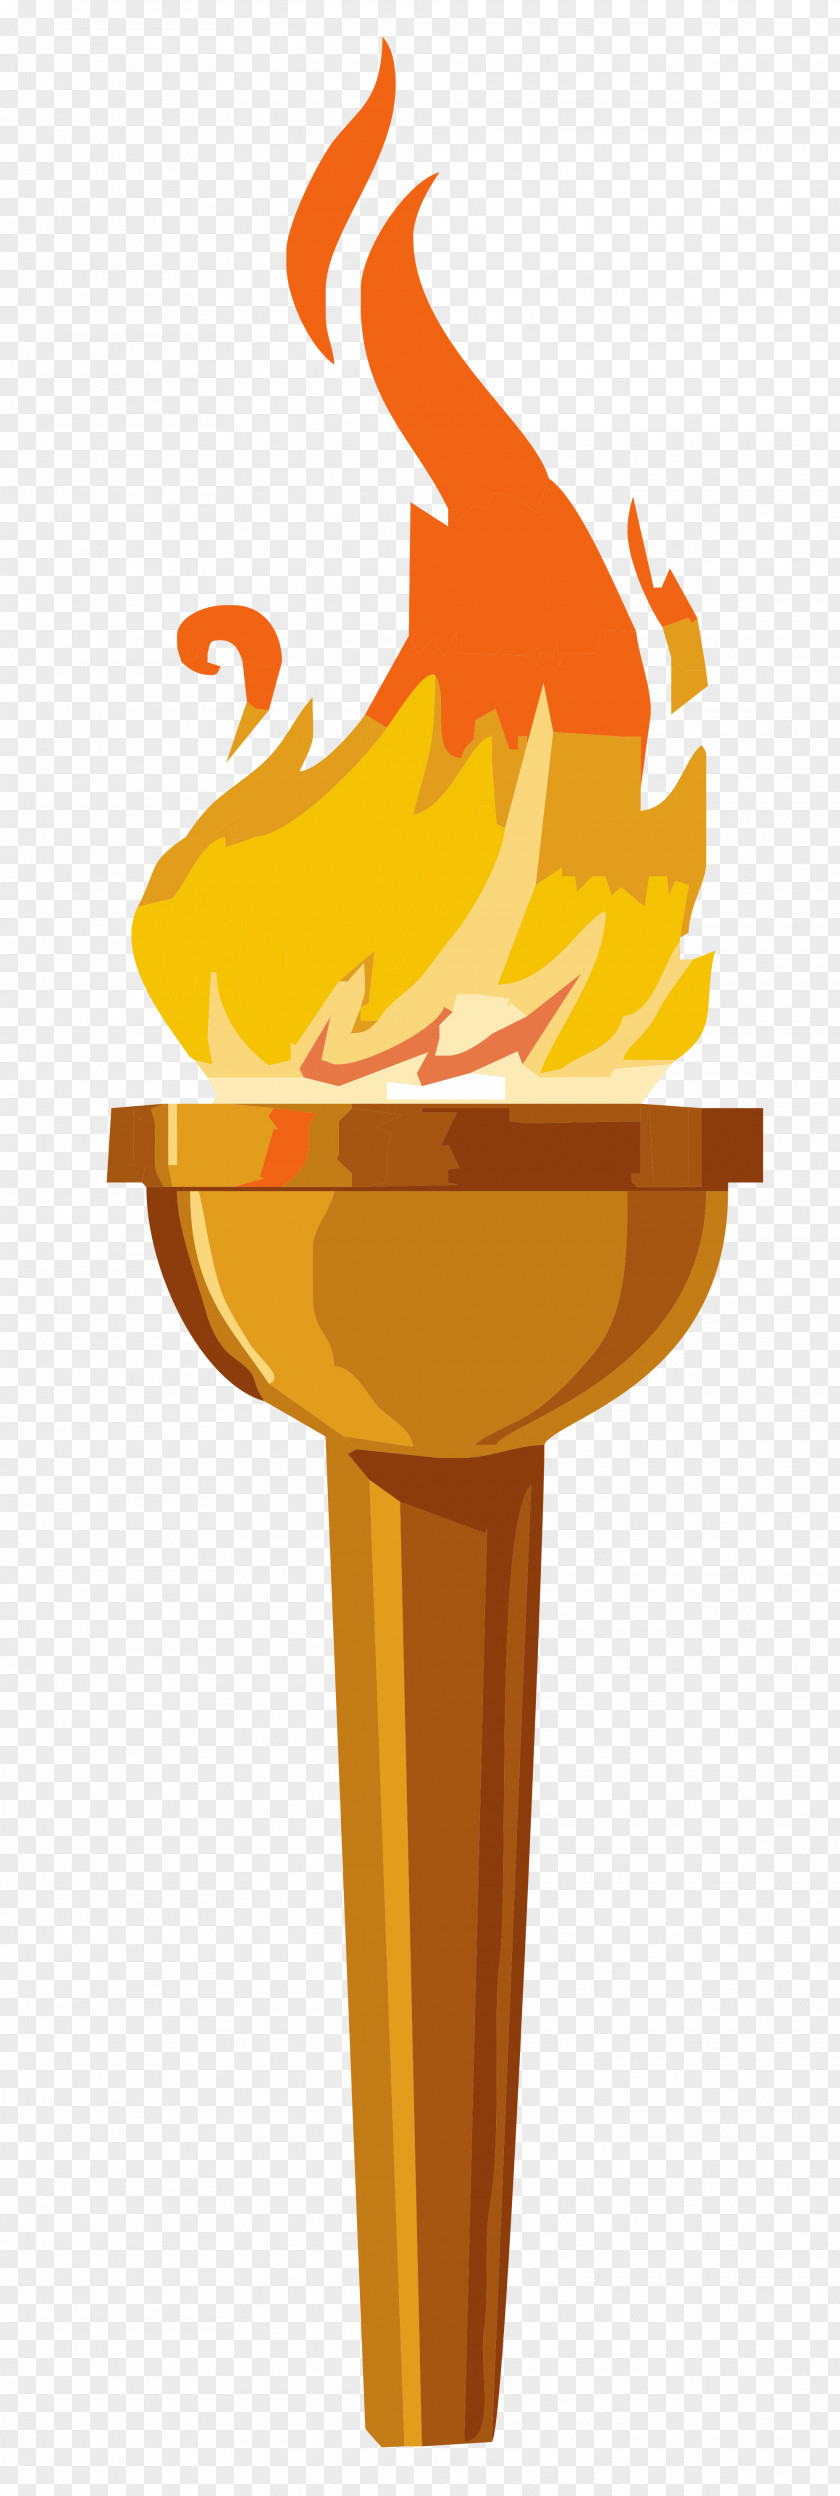 Torch Olympic Games Clip Art PNG